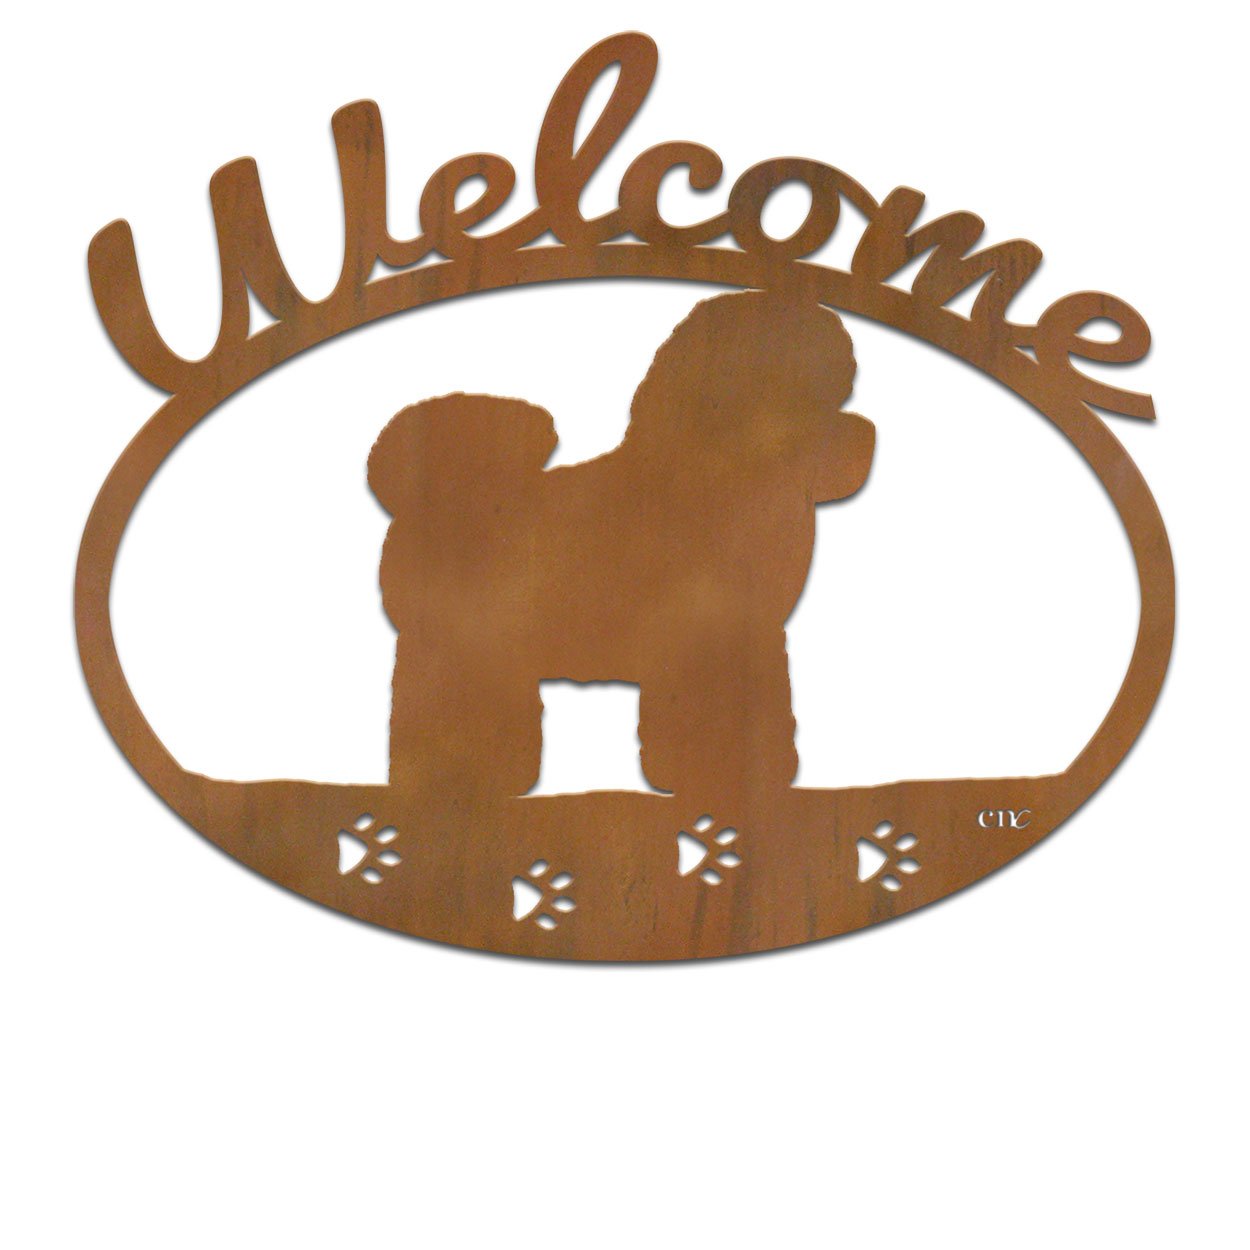 601231 - Bichons Frise Metal Welcome Sign Wall Art